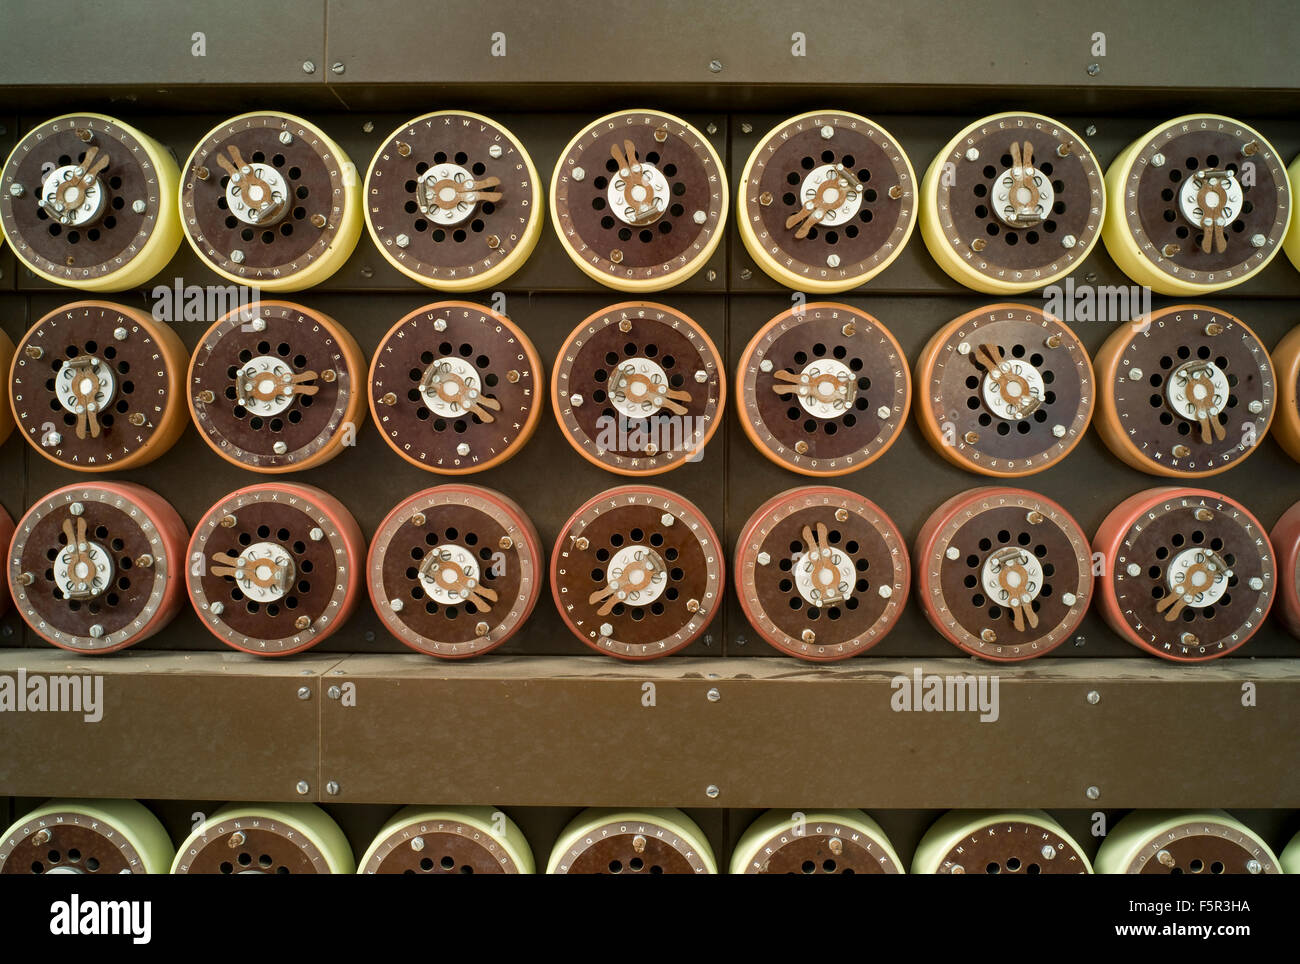 Bletchley Park bombe code cracking machine used to break the German military Enigma codes in WWII - recreated for a film as no originals exist. Stock Photo